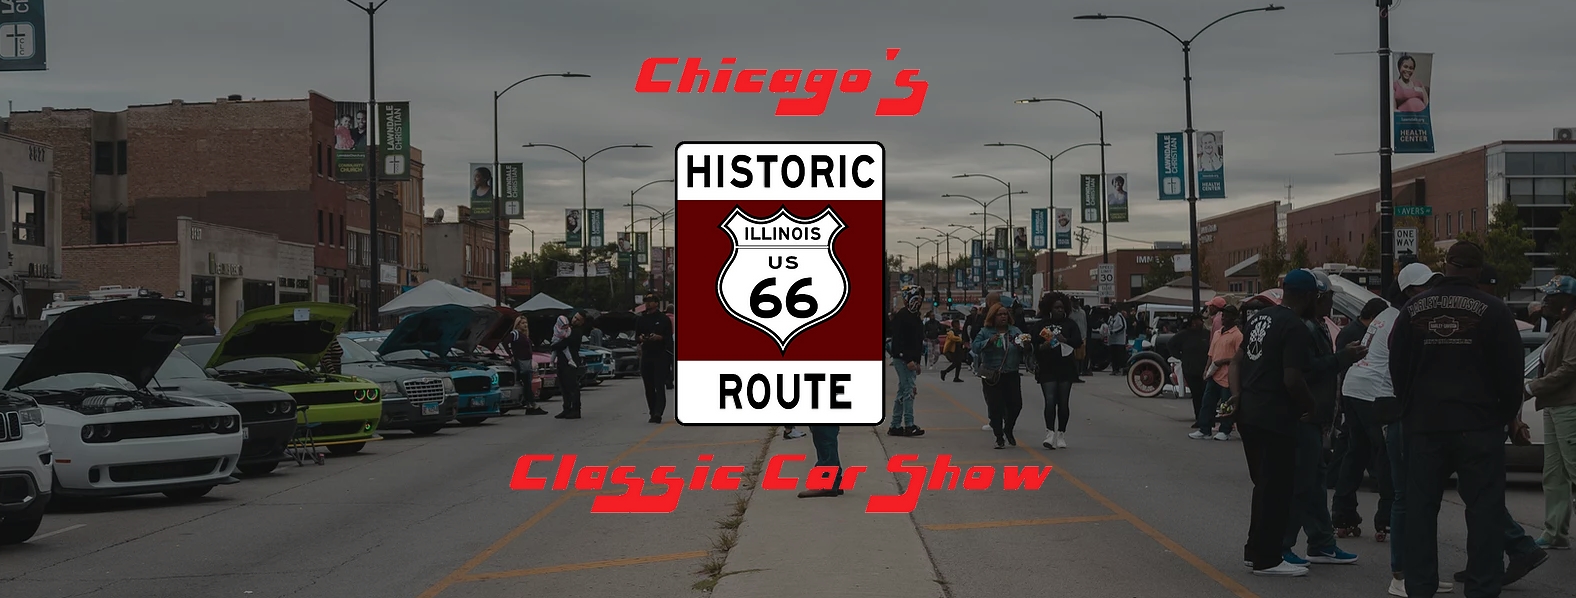 Chicago's Route 66 Classic Car Show